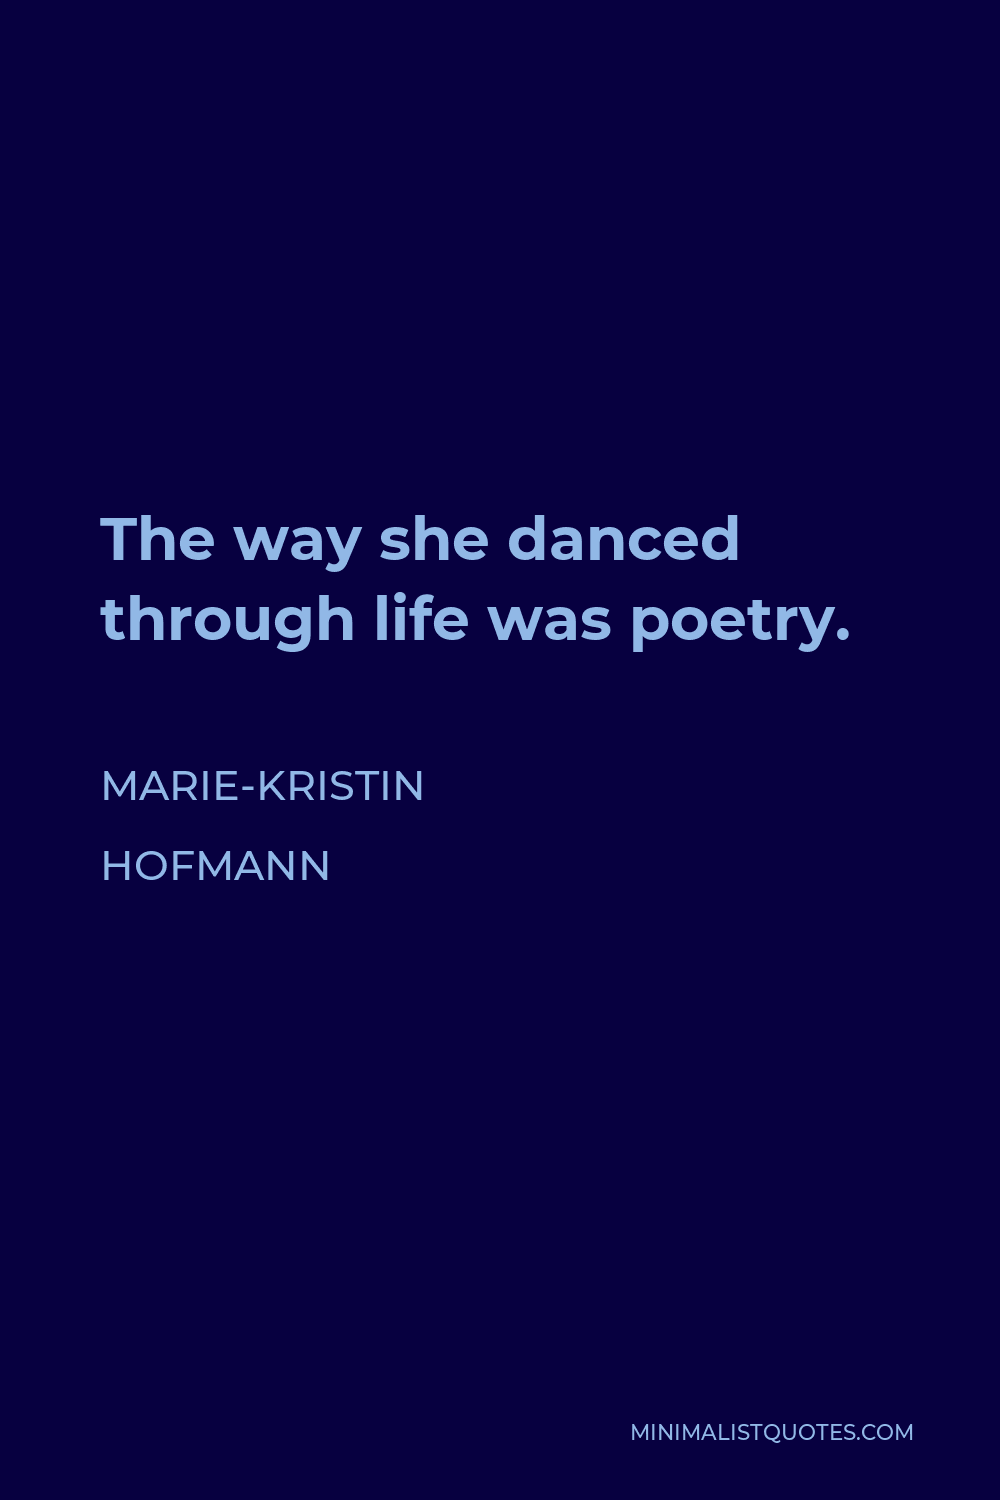 Marie-Kristin Hofmann Quote - The way she danced through life was poetry.